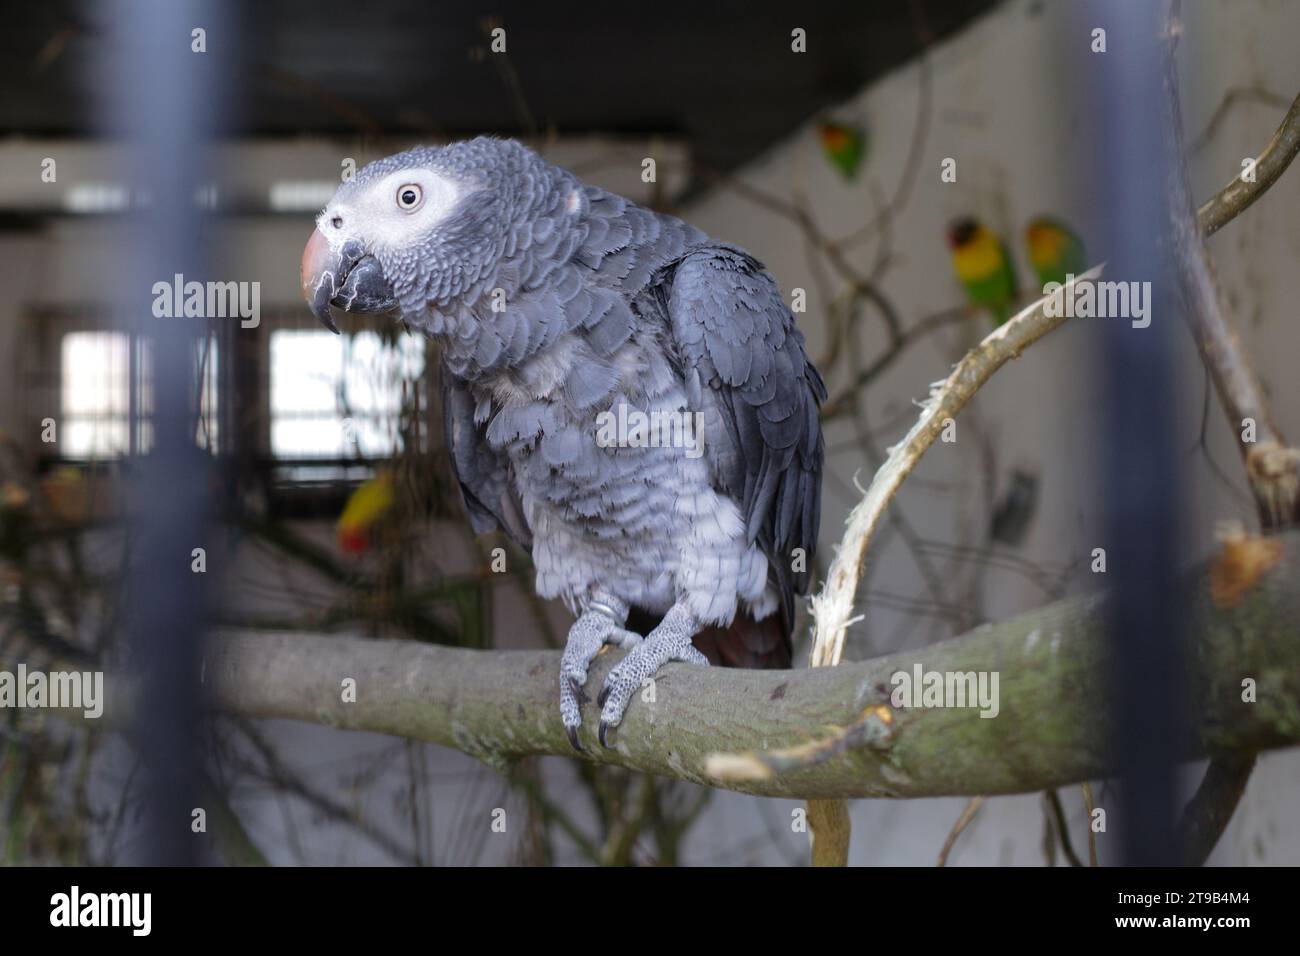 A Grey Parrot in a cage. In the background are unsharp lovebirds visible. Stock Photo